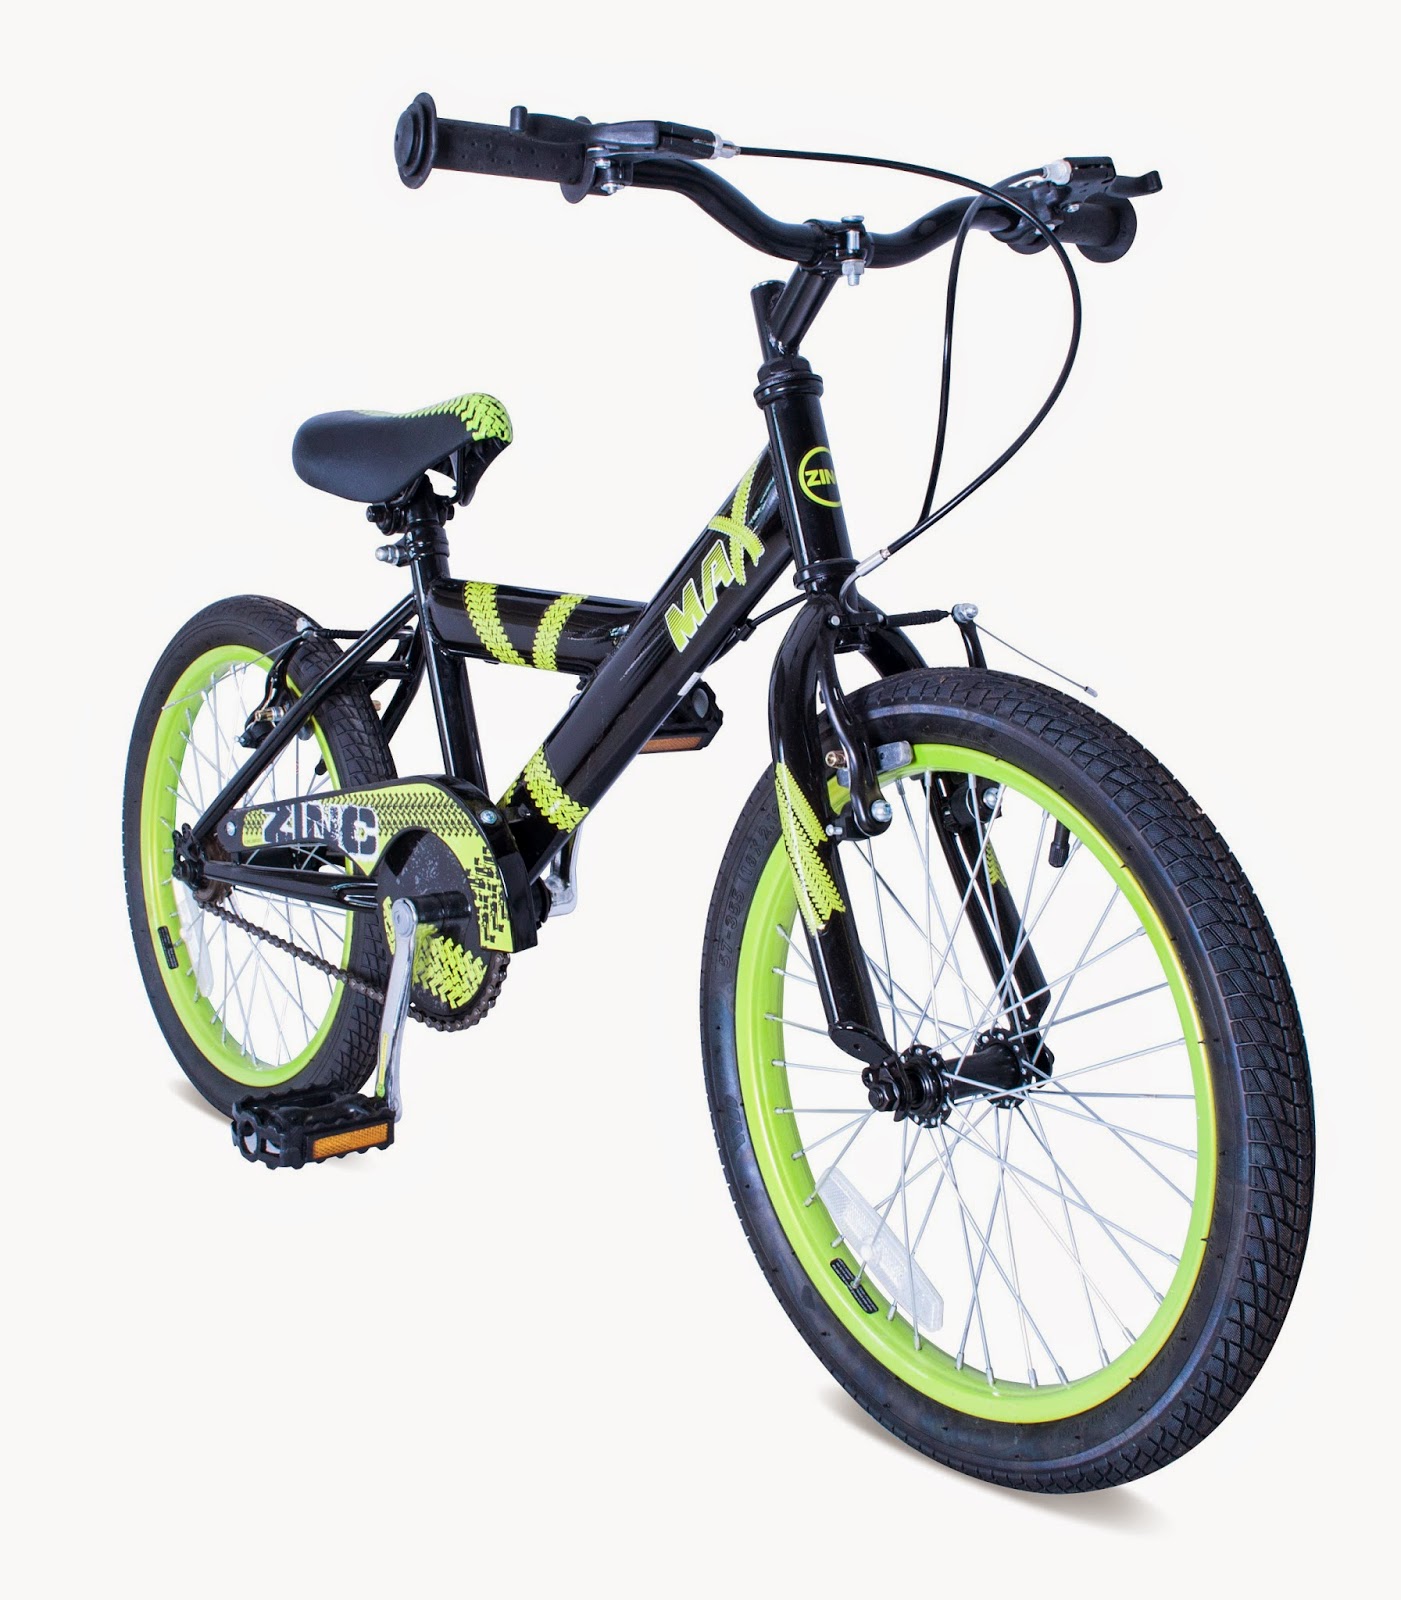 Madhouse Family Reviews: Giveaway #398 : Win an 18” mountain bike from ...